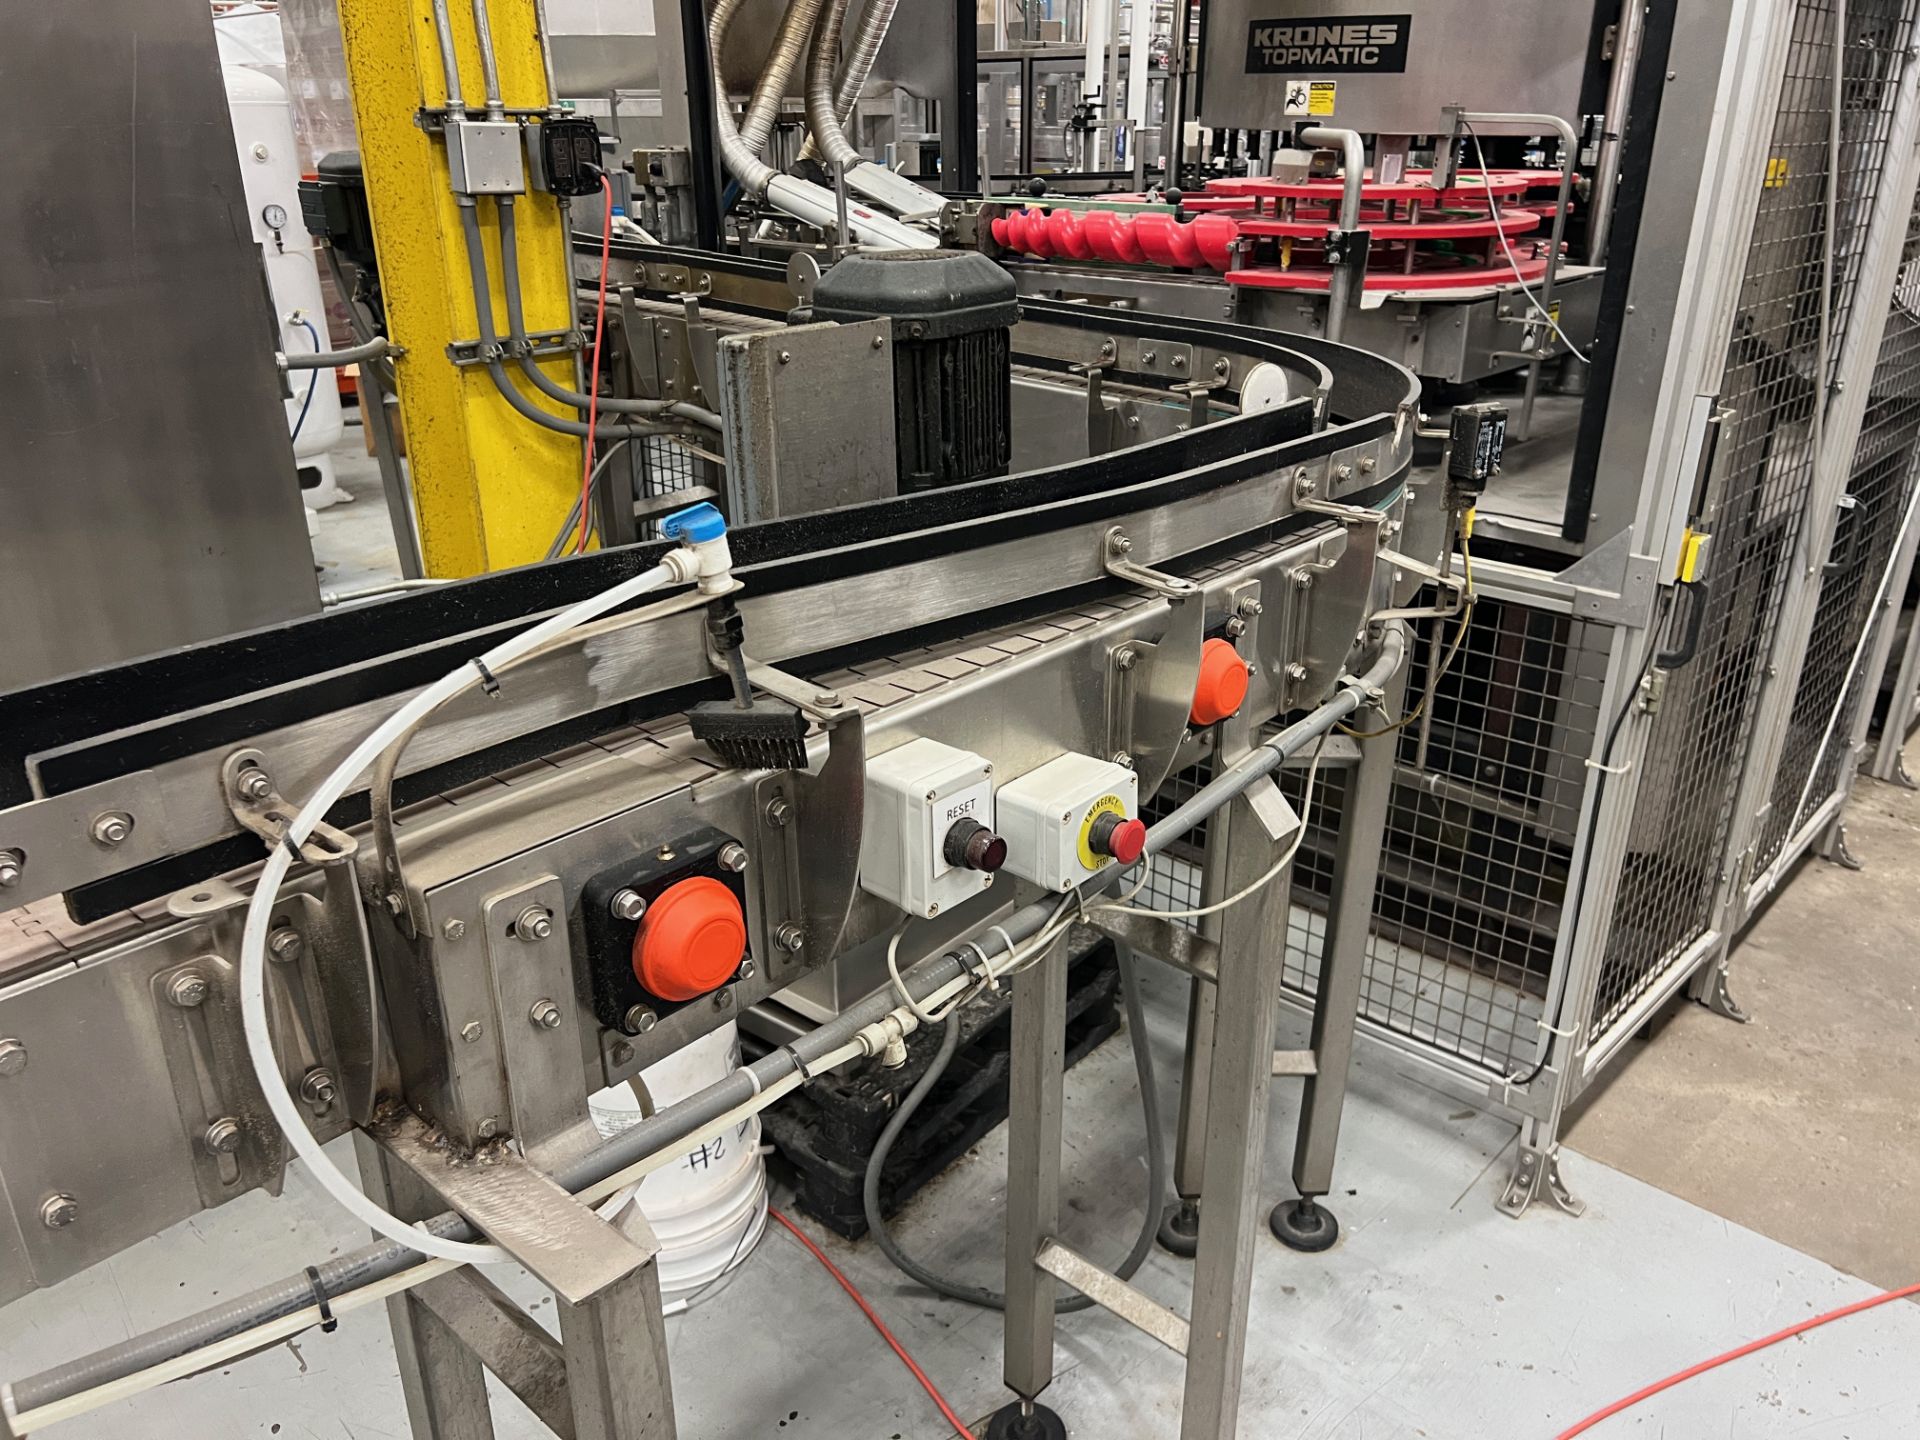 Stainless Steel Single Lane Bottle Conveyor, Approx 15ft (Topomatic Infeed) | Rig Fee $300